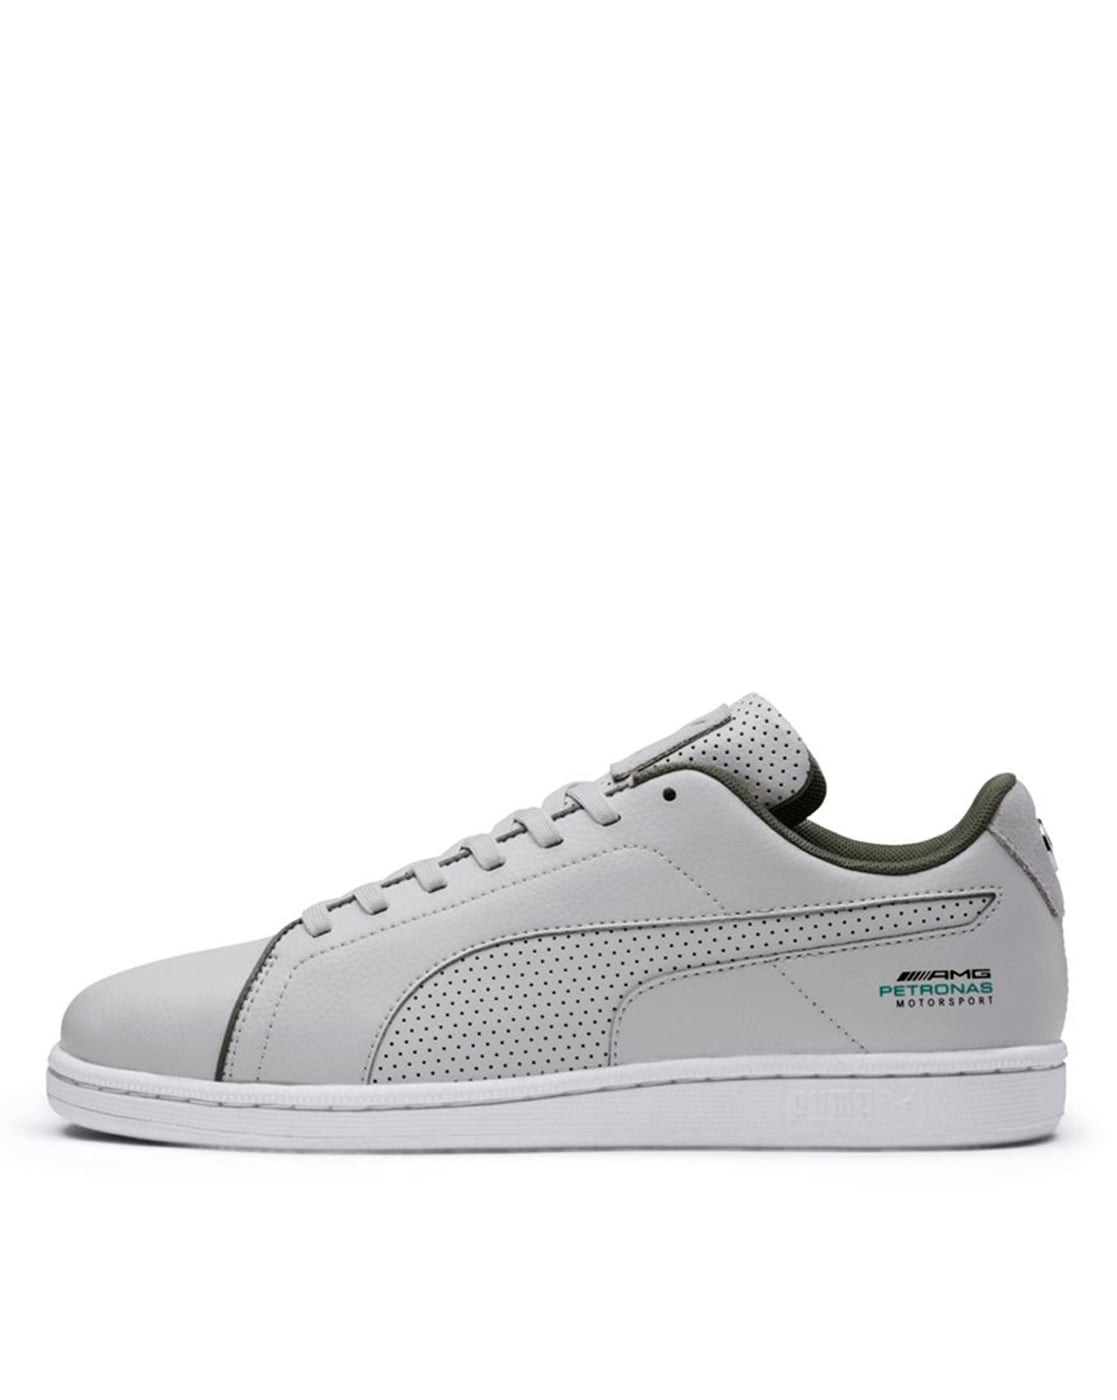 PUMA Motorsport Unisex Black Mercedes F1 A3ROCAT Printed Sneakers Price in  India, Full Specifications & Offers | DTashion.com